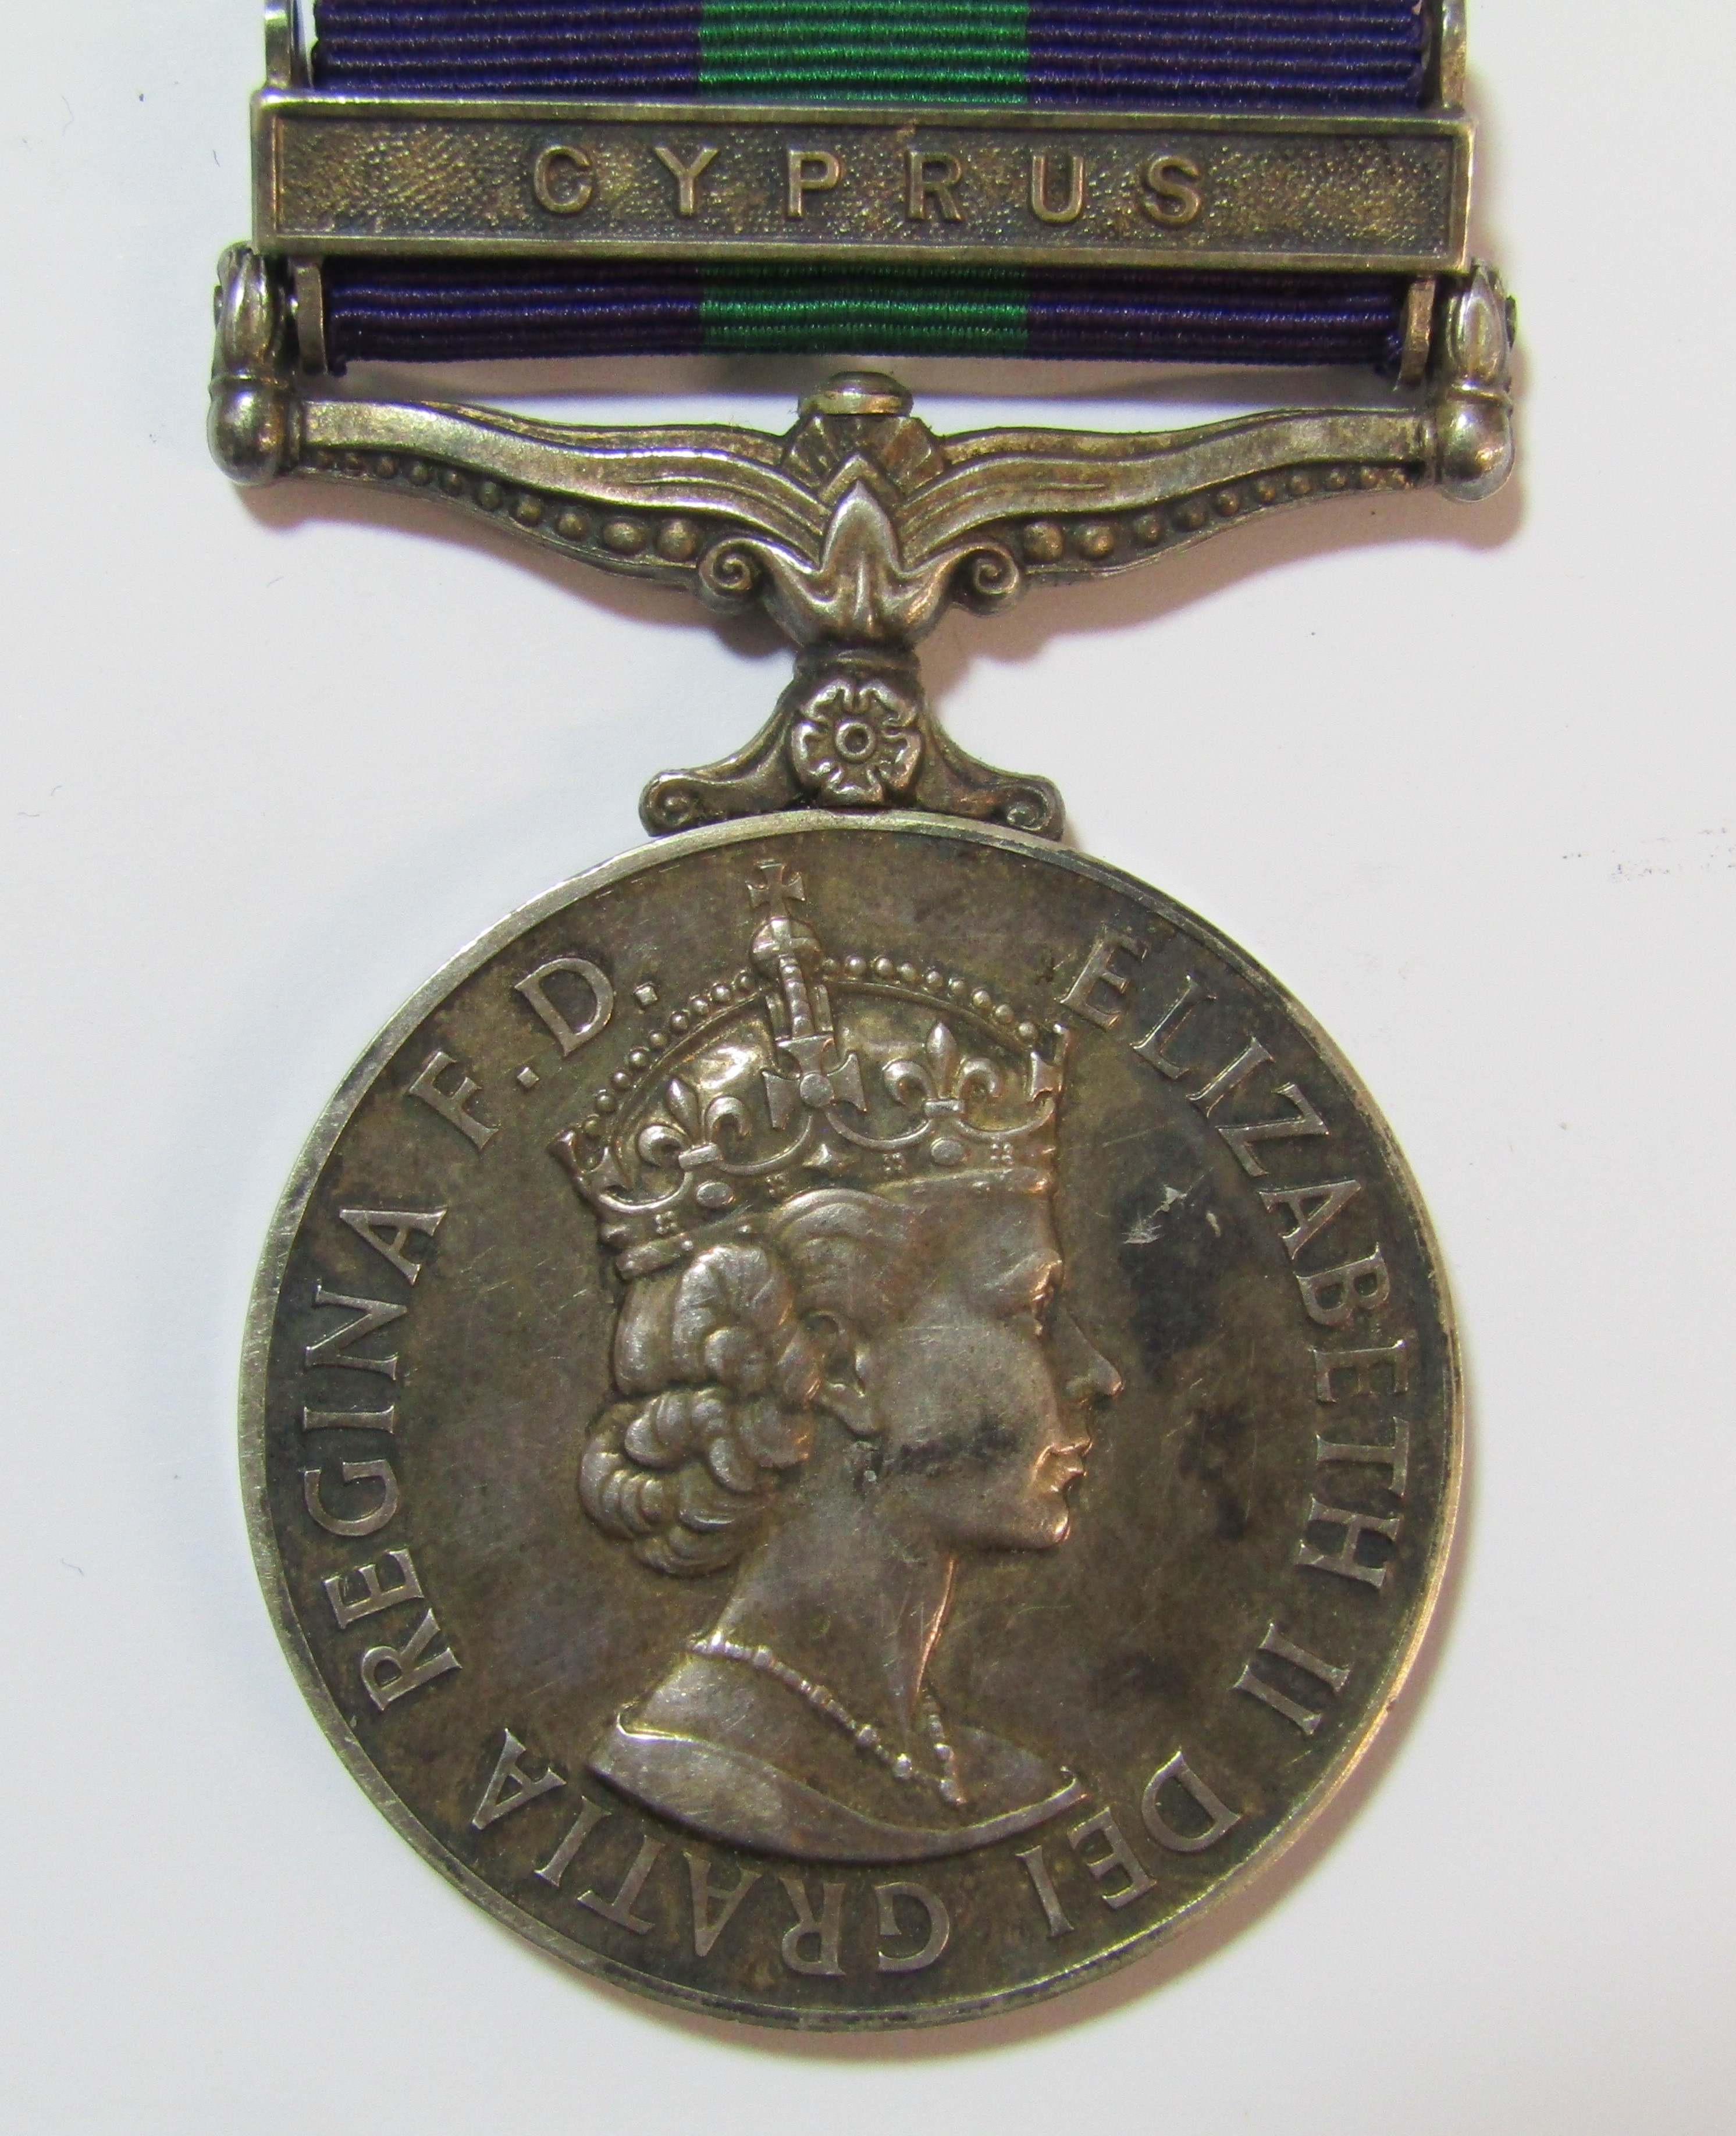 Elizabeth II Cyprus medal - 23424797 PTE D OLSEN A.C.C - with purple and green ribbon - Image 2 of 6